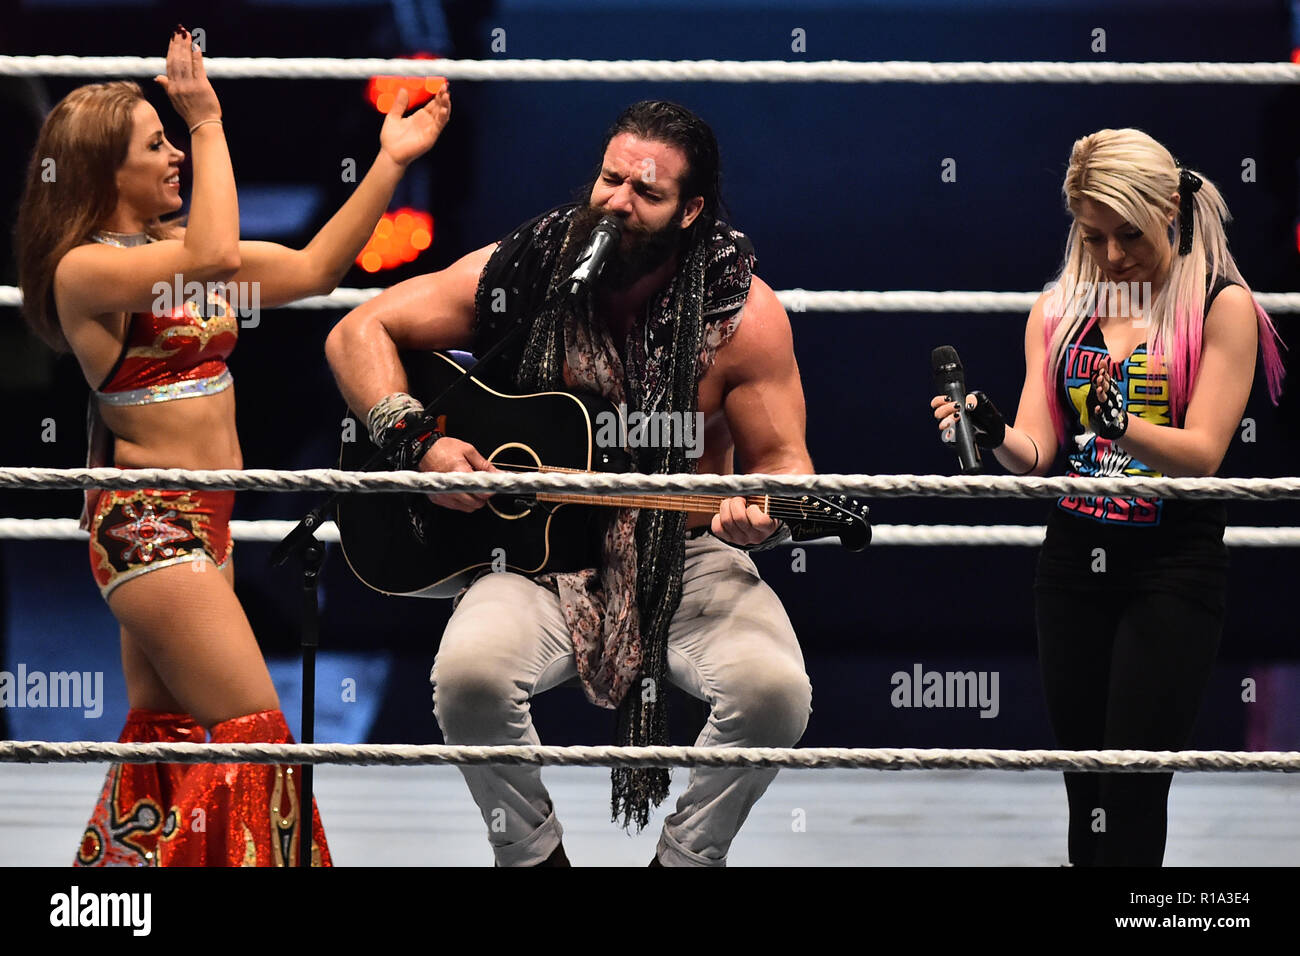 Rome, Italy. 11th Nov, 2018. Show WWE live at the Palalottomatica-Rome  10-11-2018 In the picture Sunil Singh and Alexa Bliss Photo Photographer01  Credit: Independent Photo Agency/Alamy Live News Stock Photo - Alamy